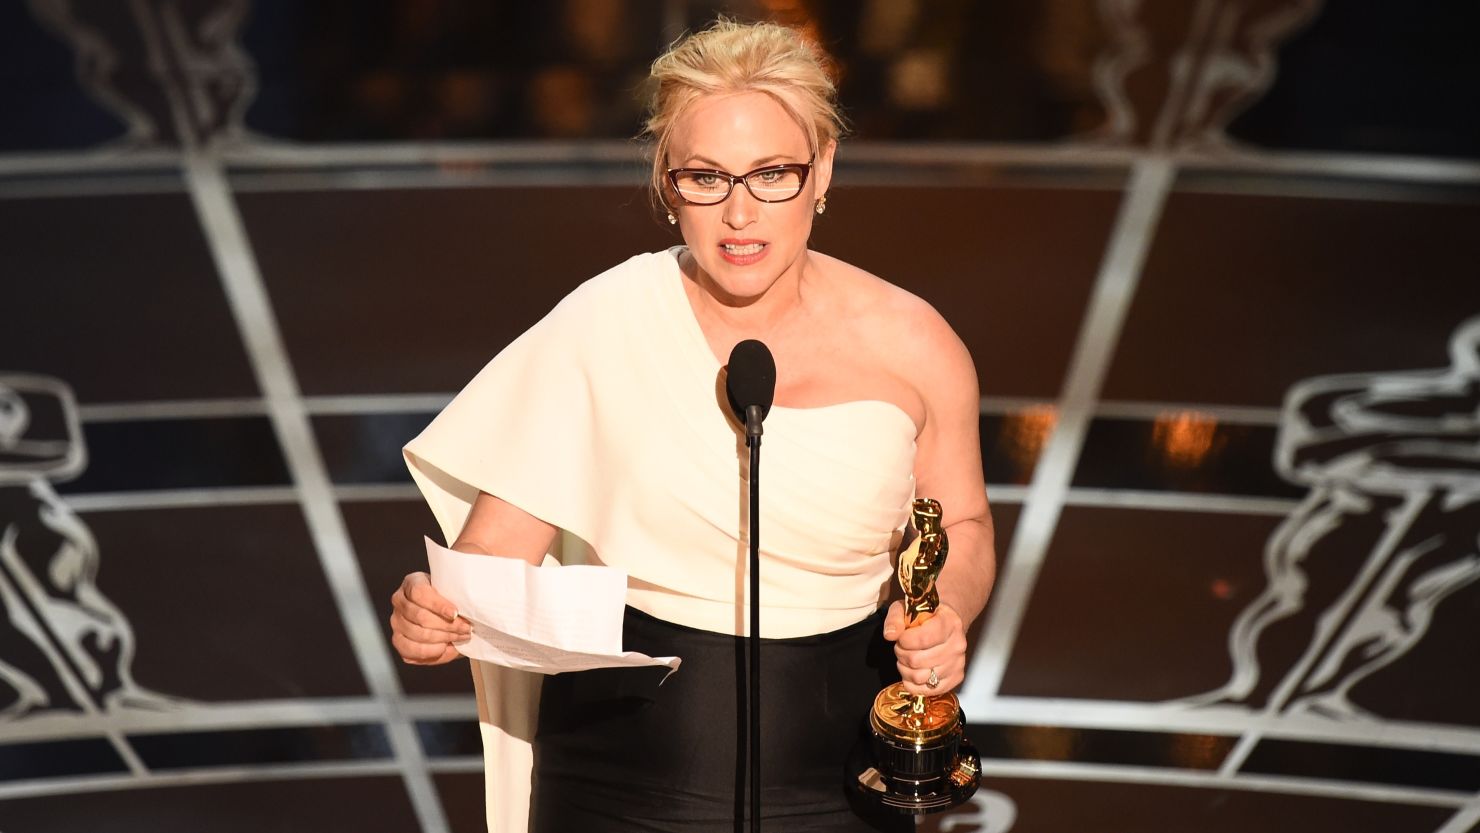 Patricia Arquette's comments in favor of equal pay have galvanized Democrats, including Hillary Clinton and Labor Secretary Tom Perez.